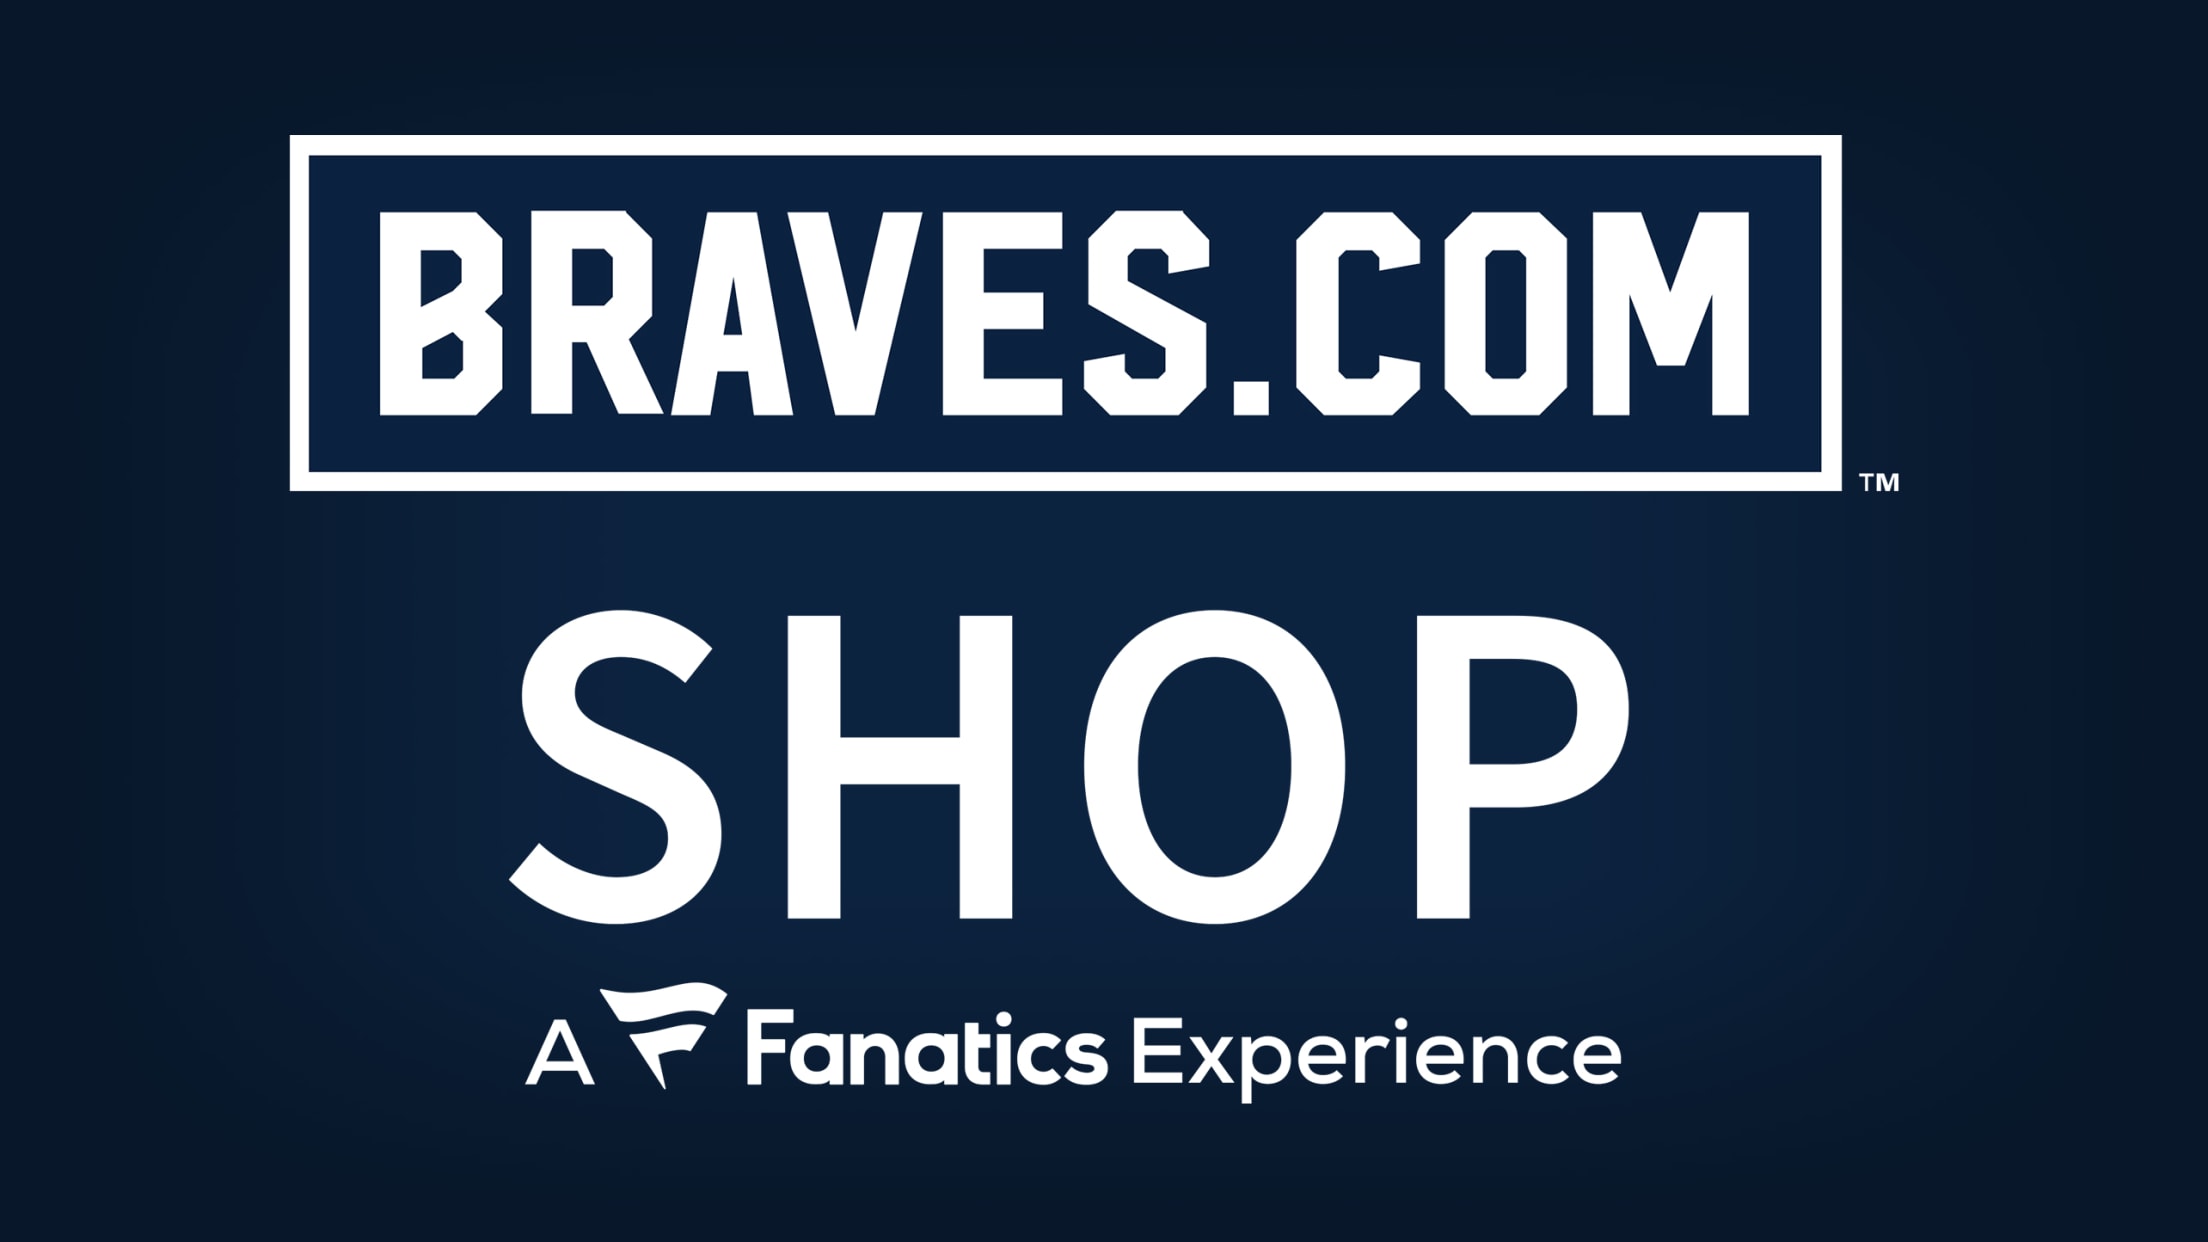 Atlanta Braves Store  Braves Apparel, Accessories, & More at Rally House